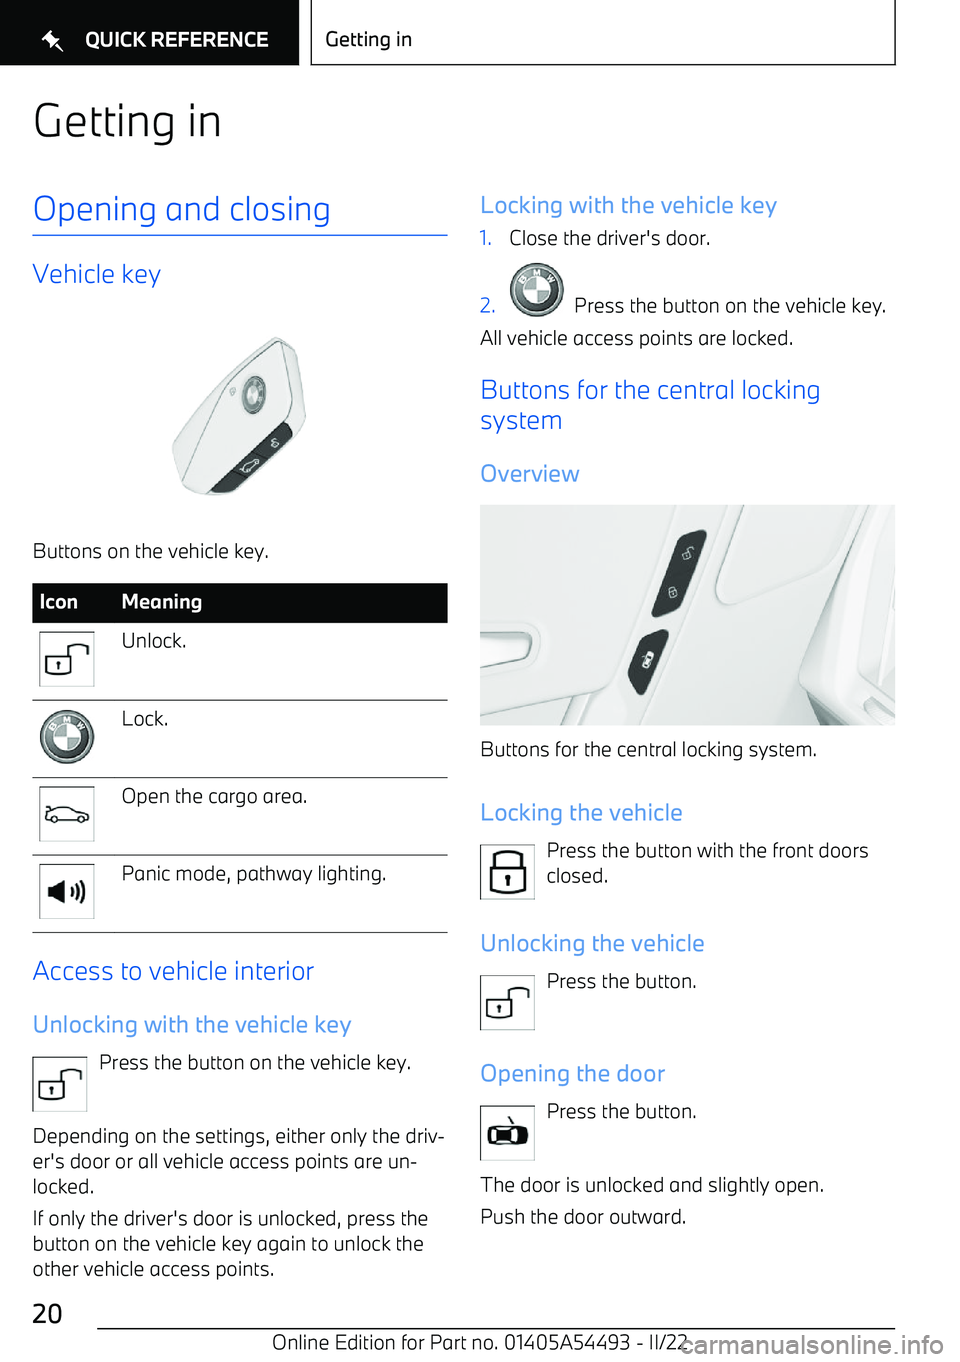 BMW IX 2022  Owners Manual Getting inOpening and closing
Vehicle key
Buttons on the vehicle key.
IconMeaningUnlock.Lock.Open the cargo area.Panic mode, pathway lighting.
Access to vehicle interiorUnlocking with the vehicle key 